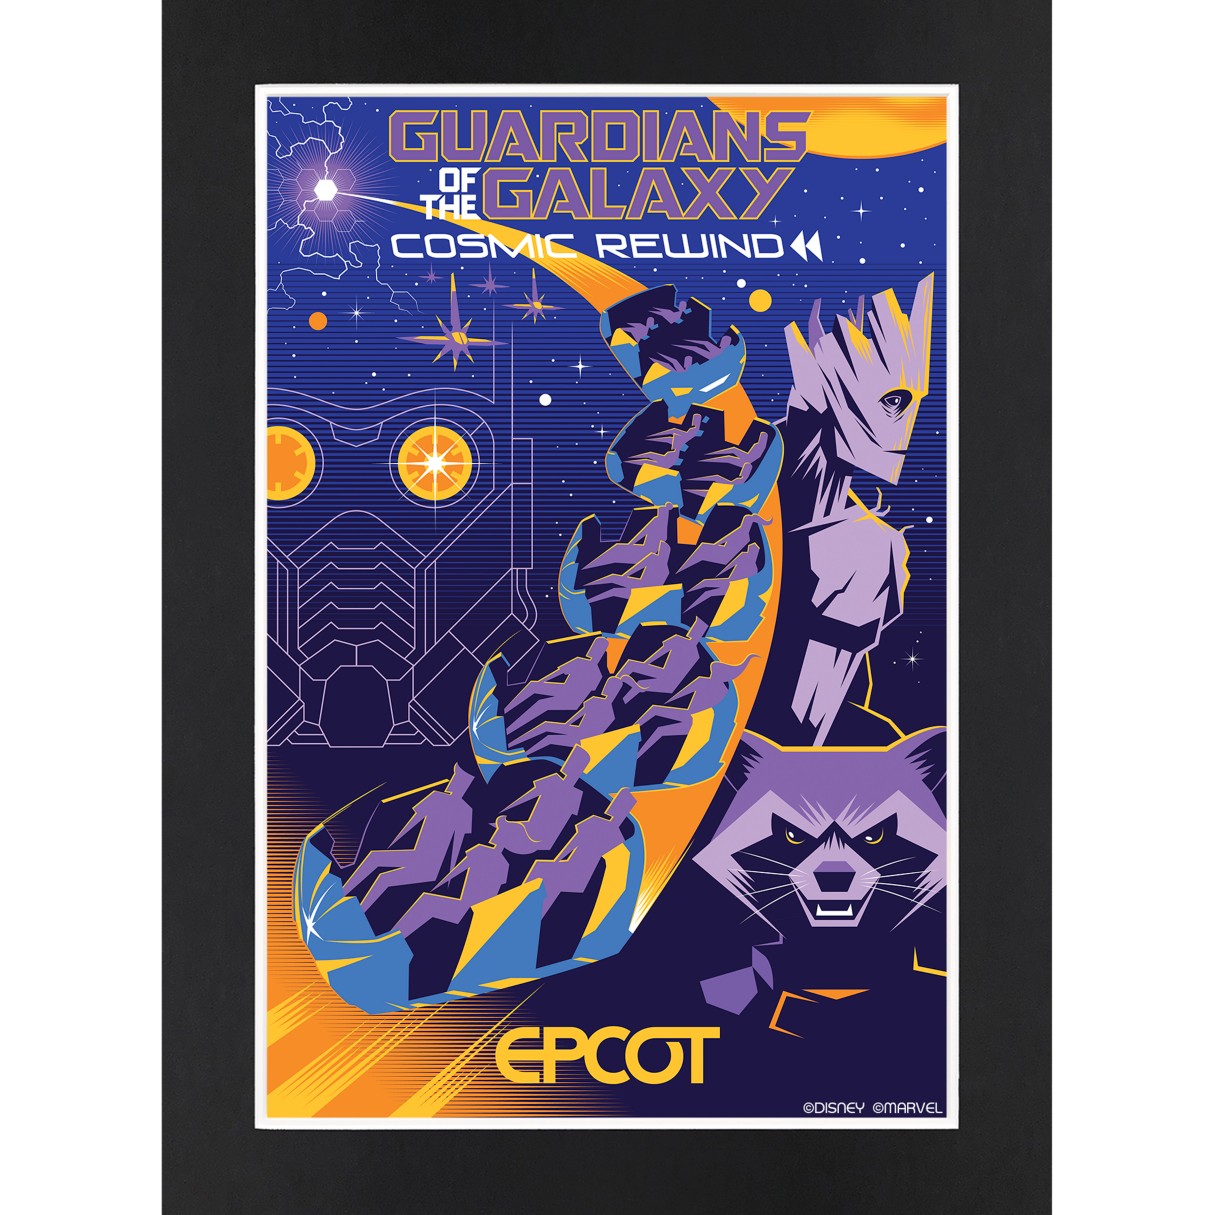 EPCOT Guardians of the Galaxy Cosmic Rewind Matted Print